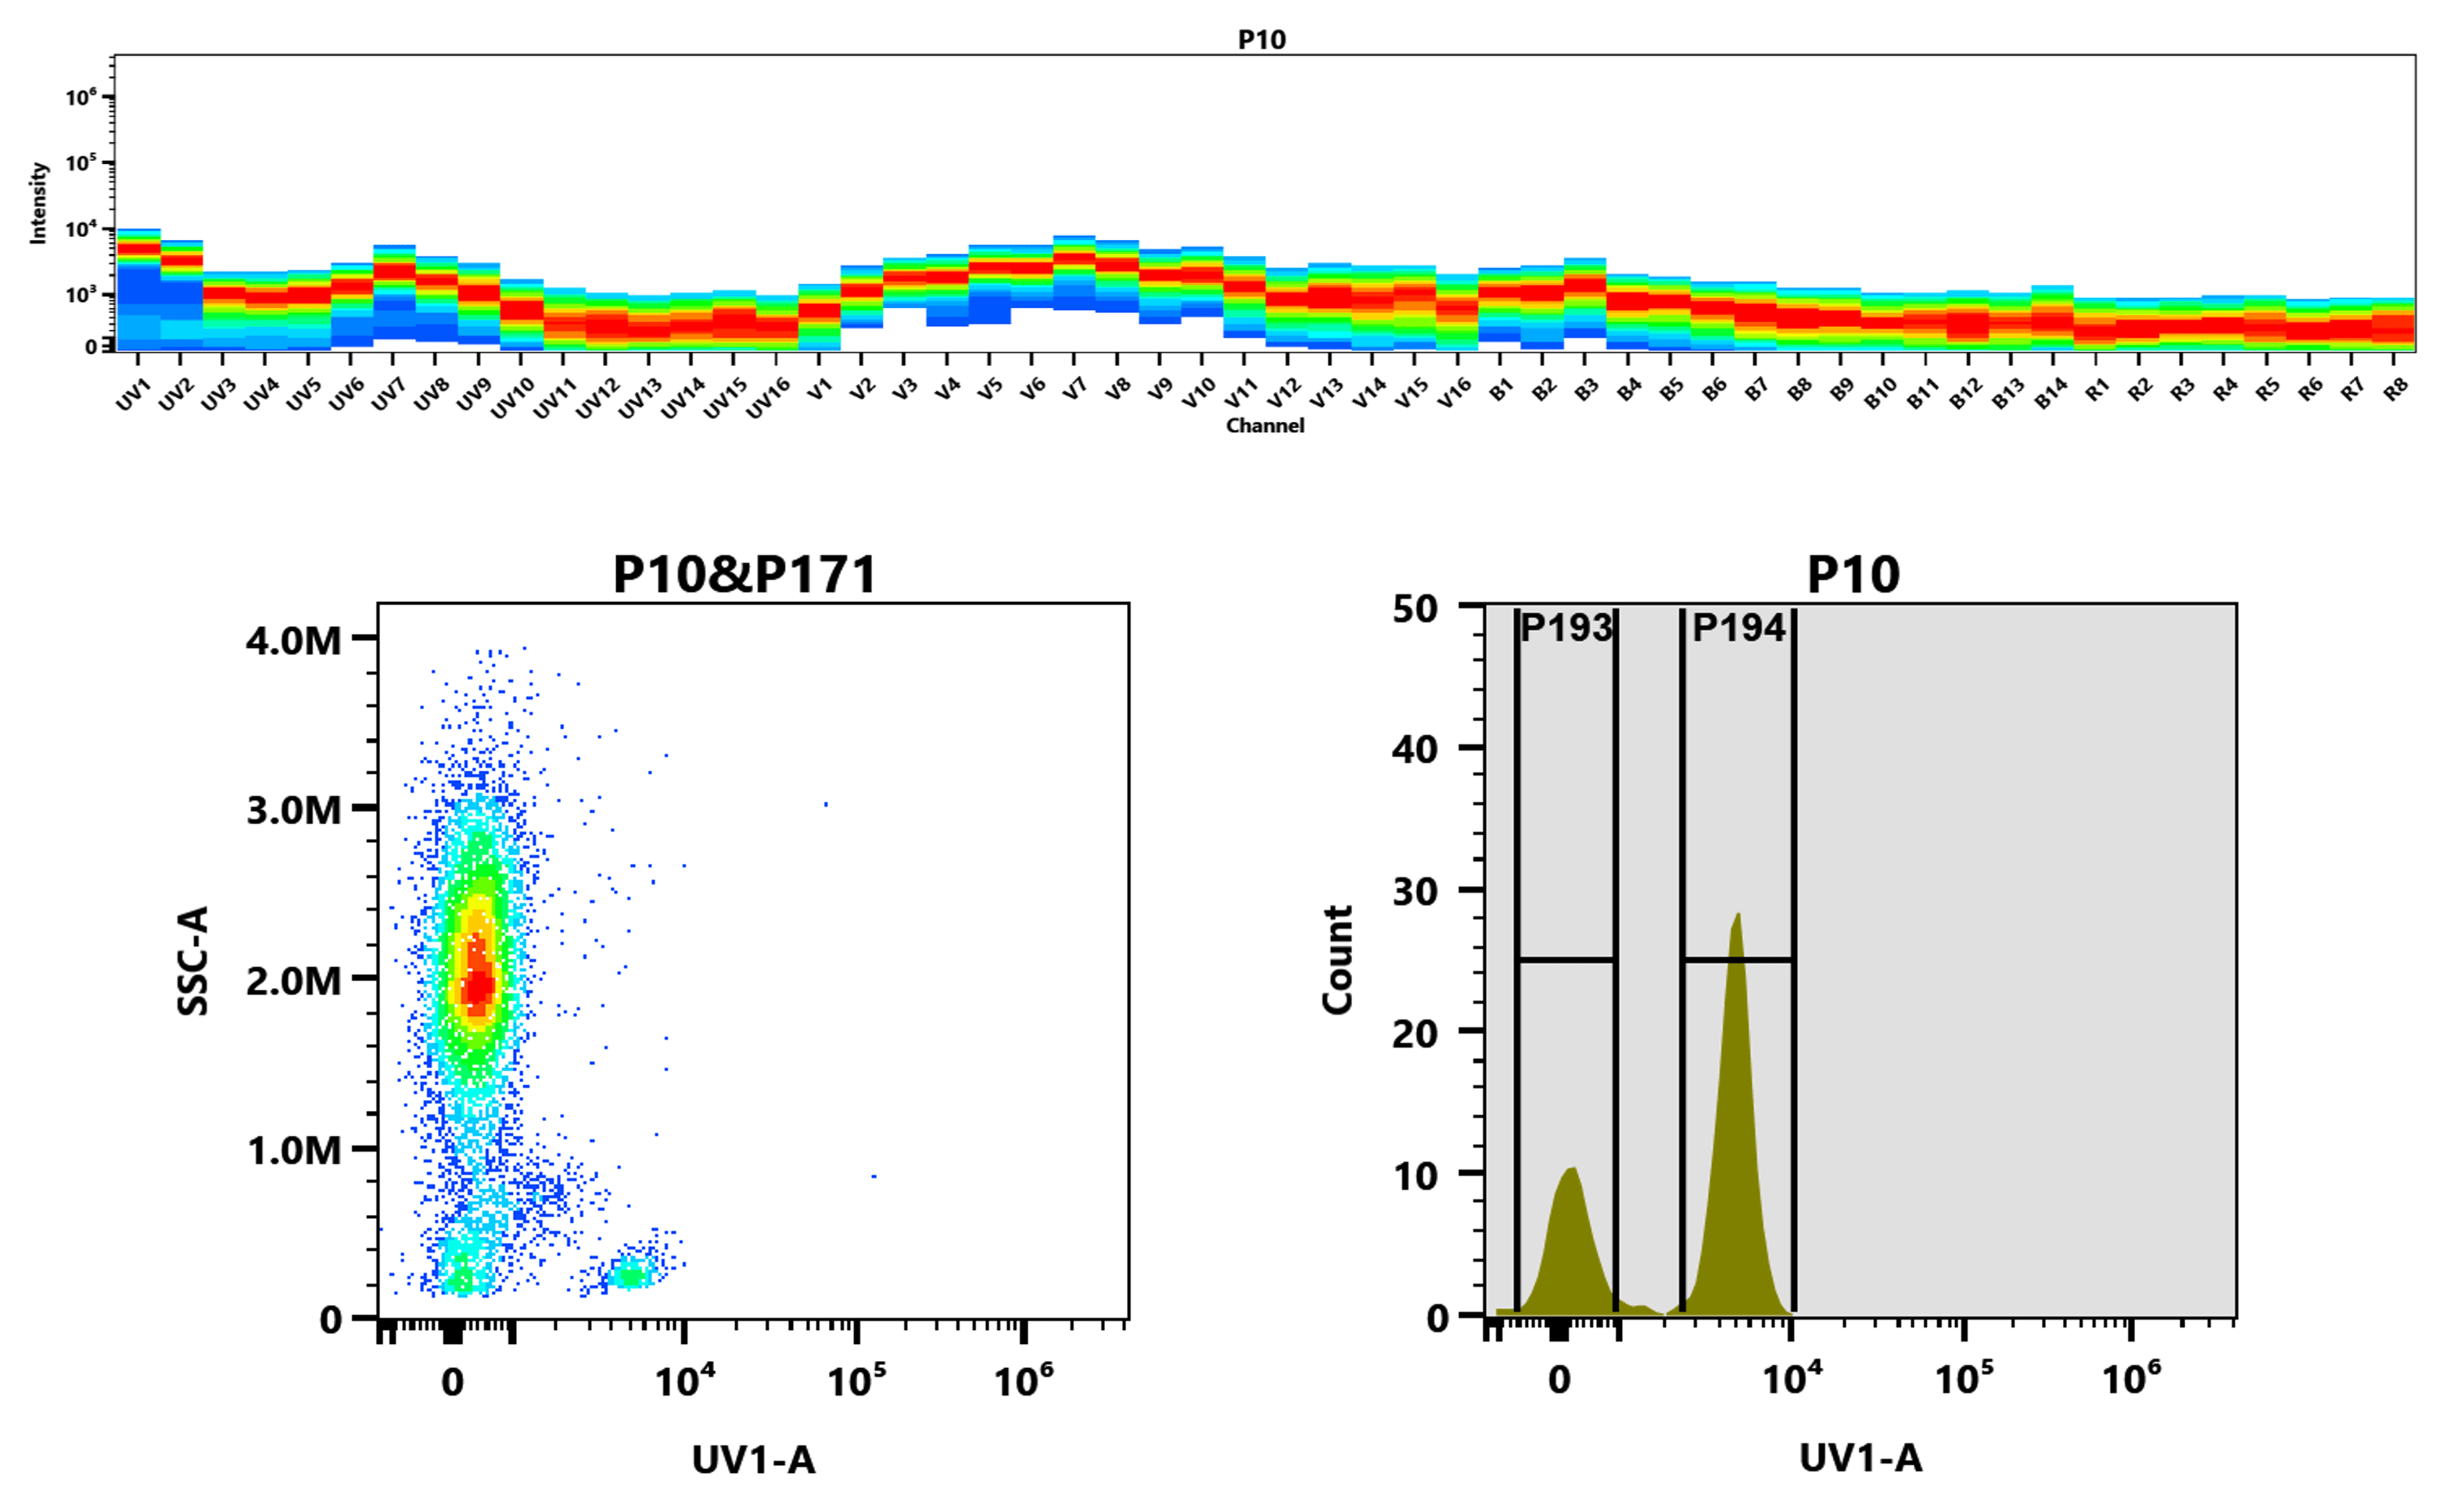 Top) The Spectral pattern was generated using a 4-laser spectral cytometer. Four spatially offset lasers (355 nm, 405 nm, 488 nm, and 640 nm) were used to create four distinct emission profiles, which, when combined, yielded the overall spectral signature. Bottom) Flow cytometry analysis of whole blood stained with mFluor™ UV375 anti-human CD4 *SK3* conjugate. The fluorescence signal was monitored using an Aurora spectral flow cytometer in the mFluor™ UV375 UV1-A channel.